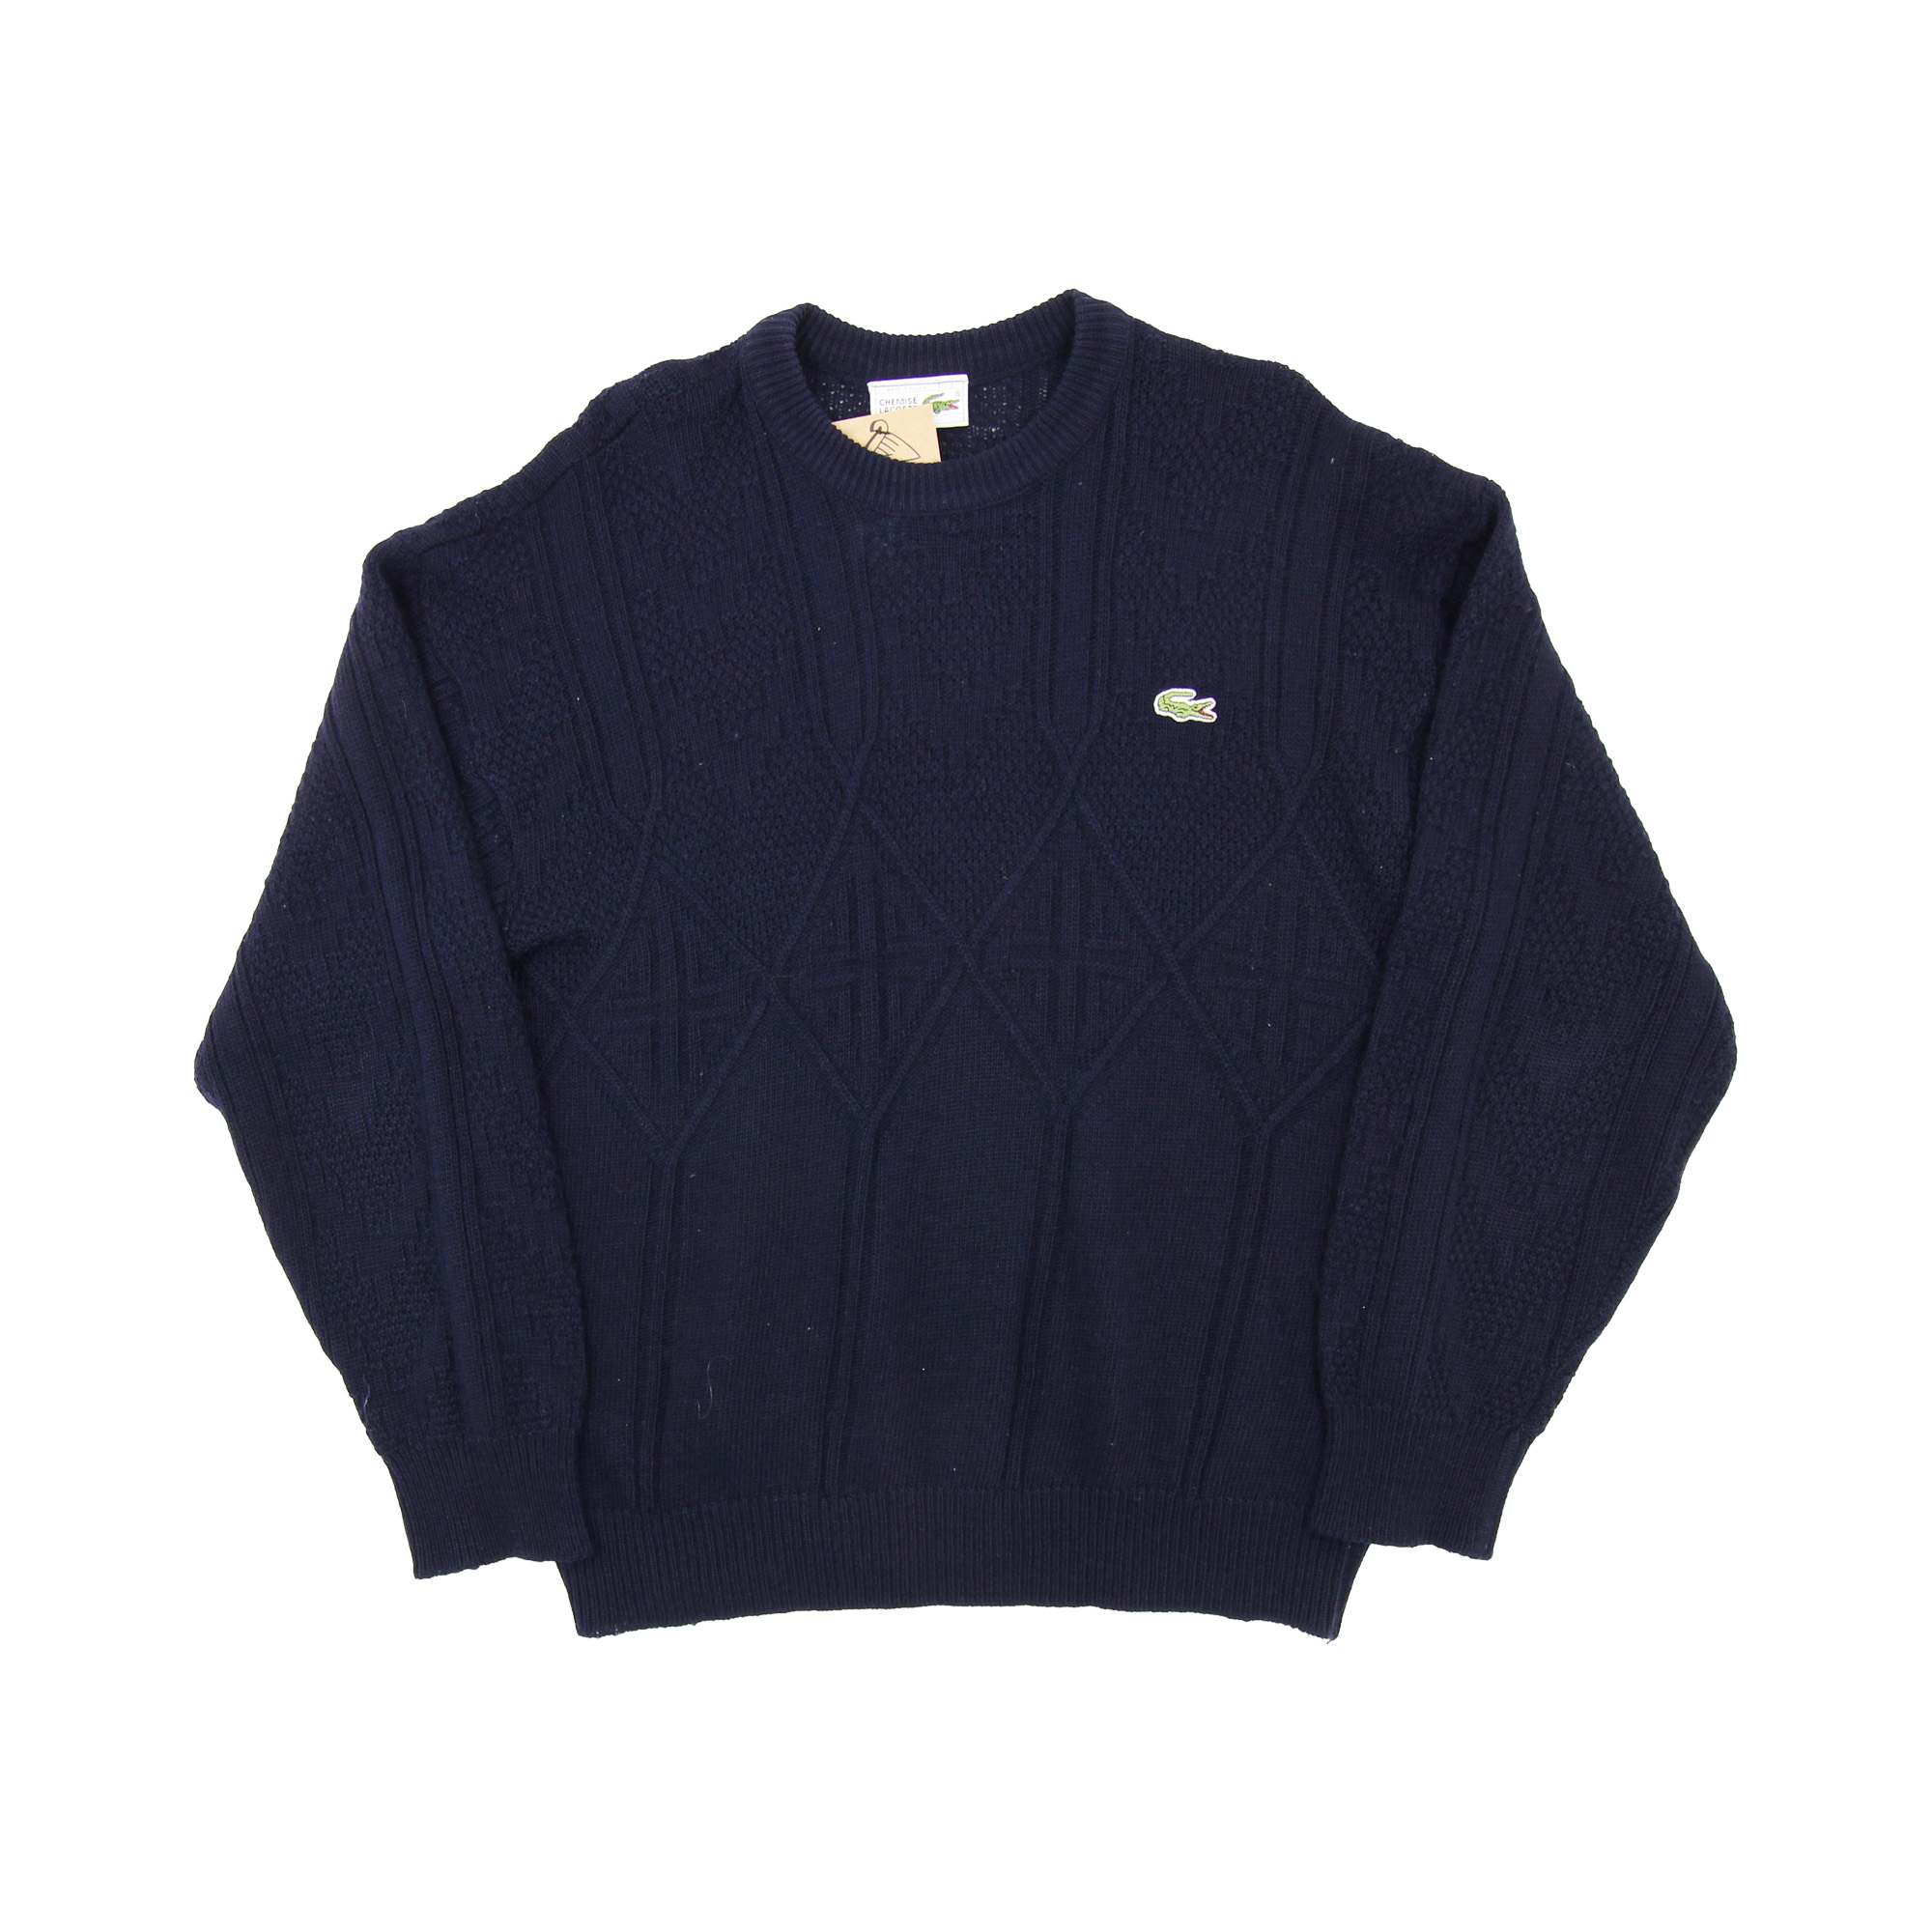 Lacoste Embroidered Logo Knitwear -  M